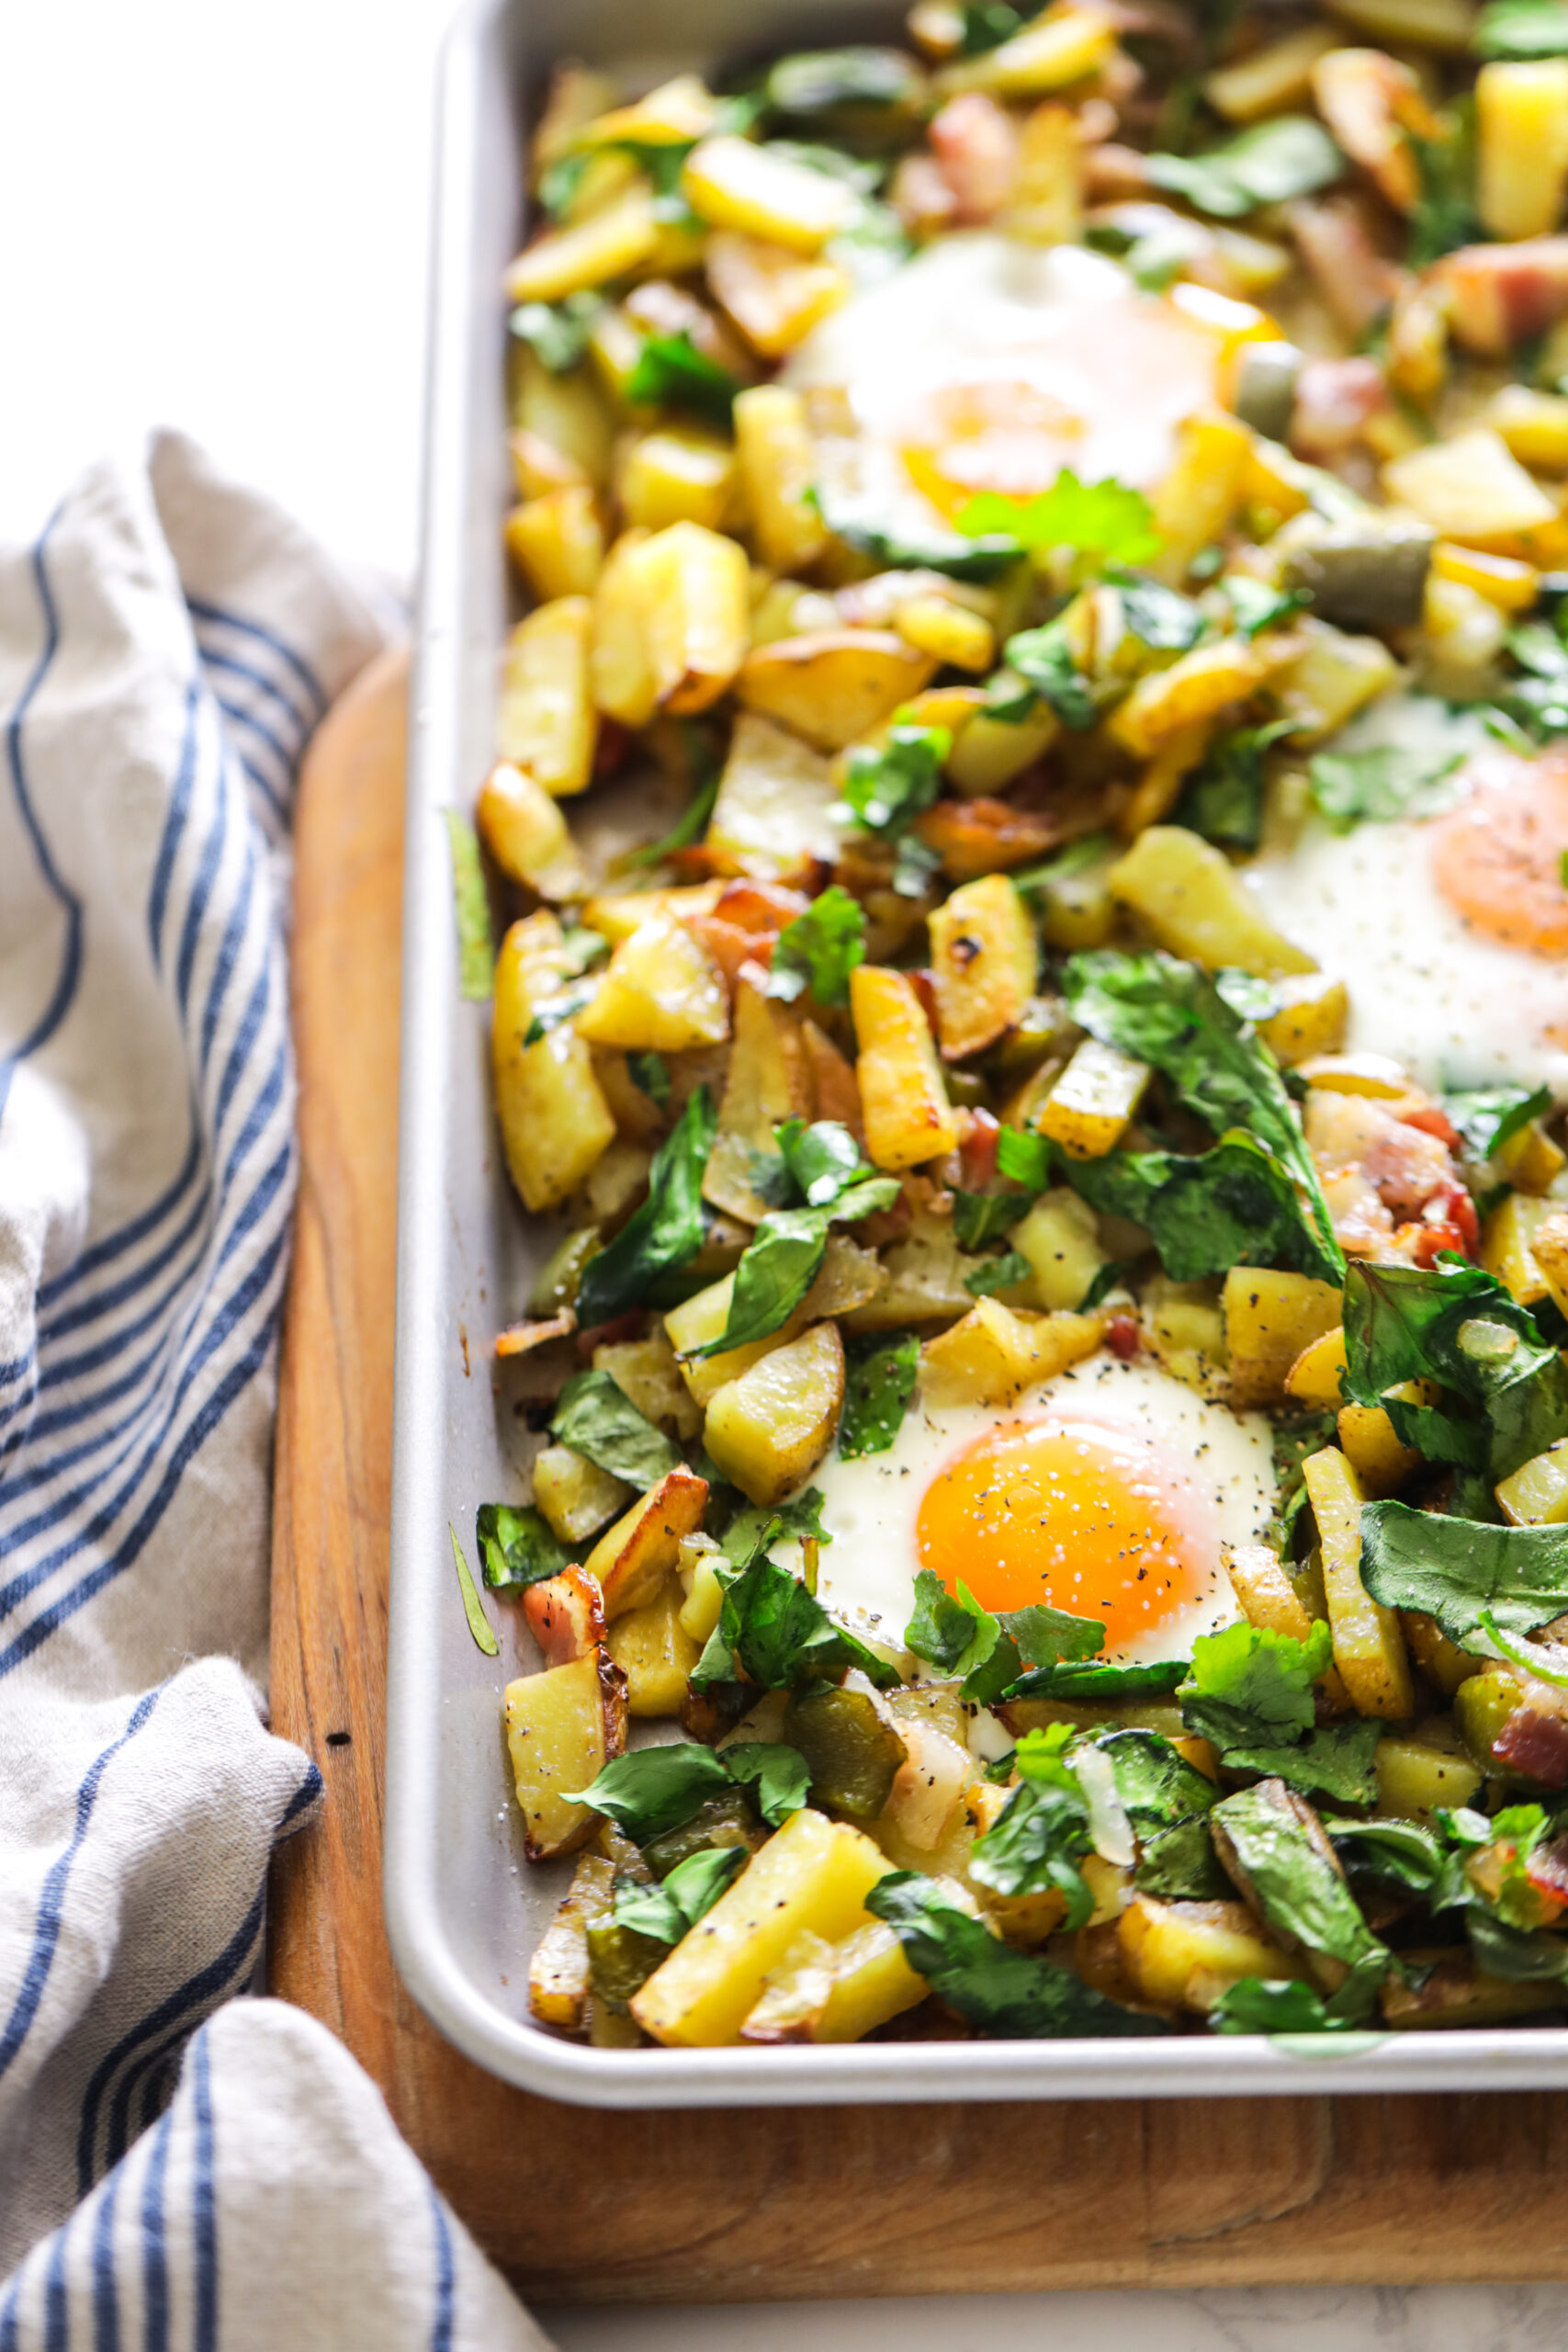 Potatoes, bacon, spinach, and eggs cooked on a sheet pan.